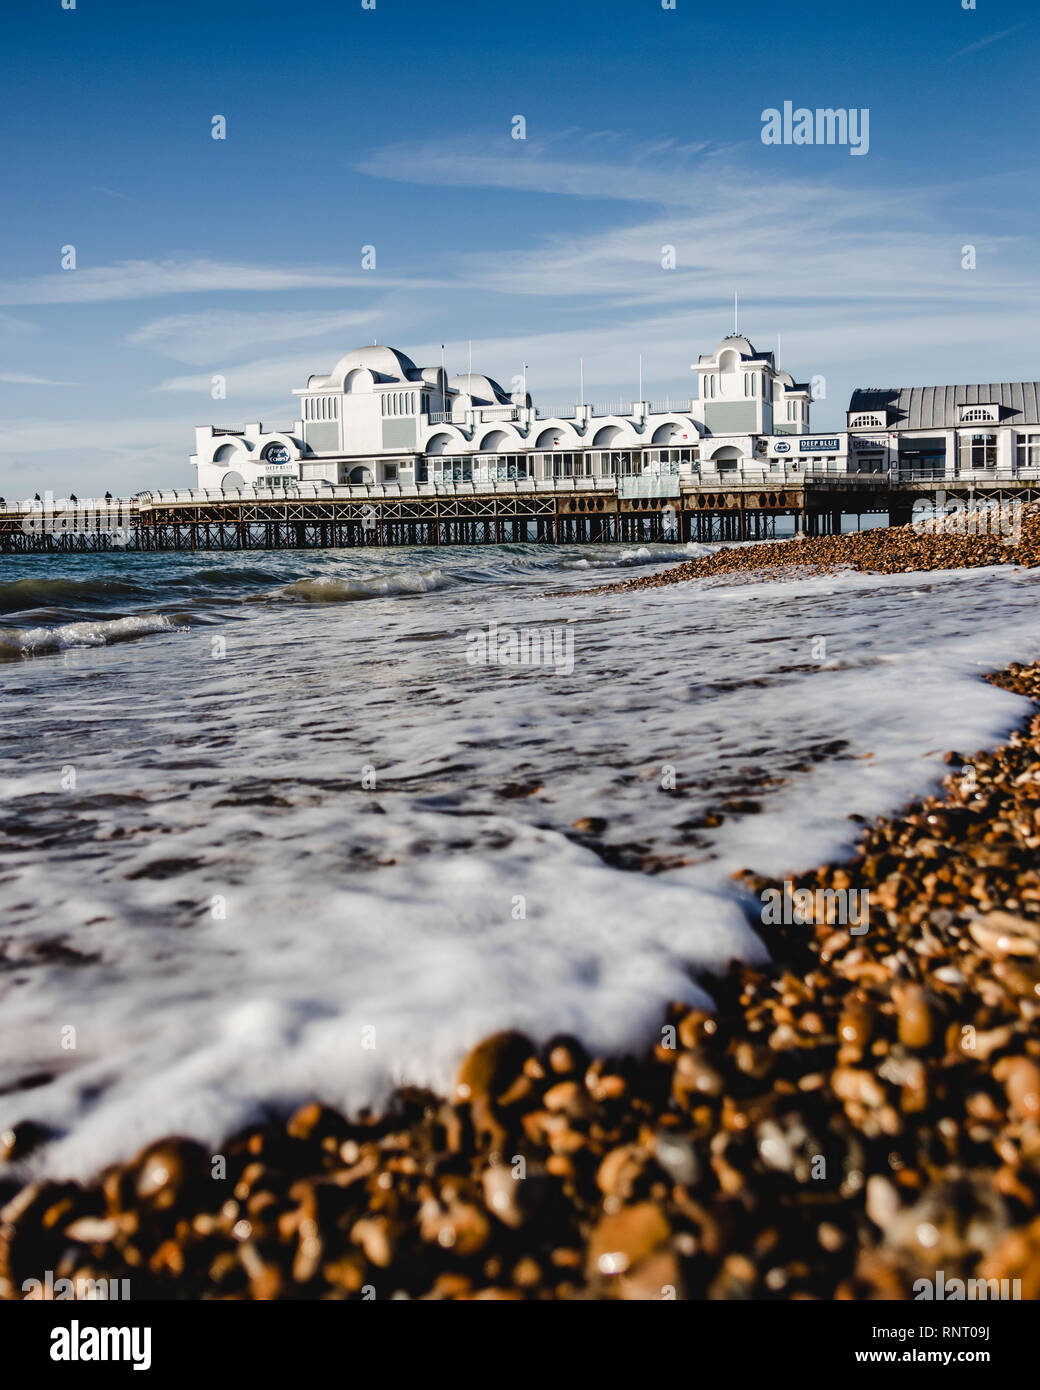 South parade pier, Southsea, Portsmouth, Hampshire, UK Stock Photo